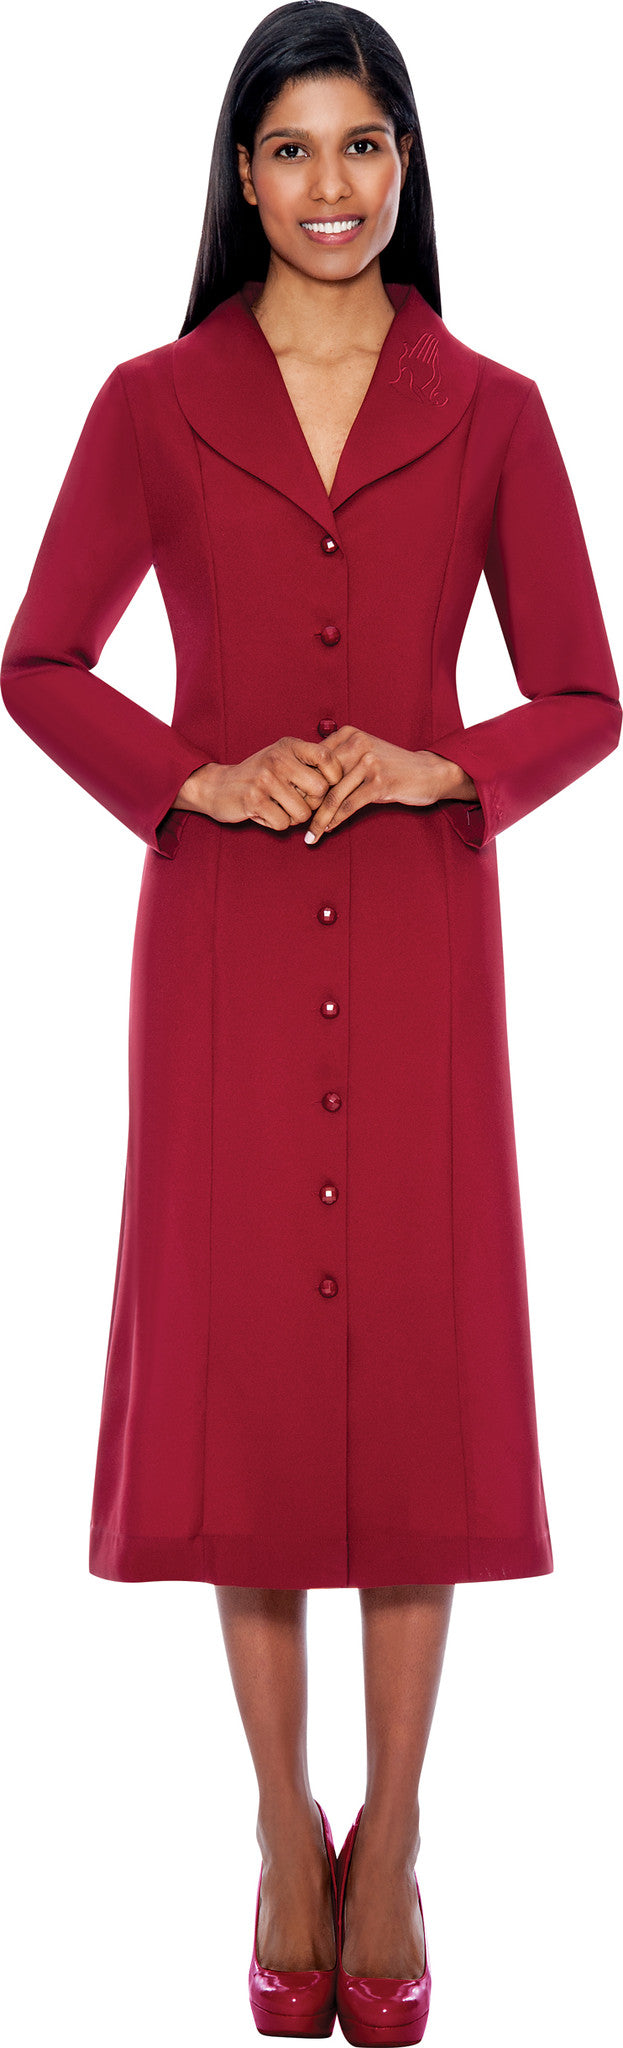 GMI Usher Suit-11674-Burgundy - Church Suits For Less